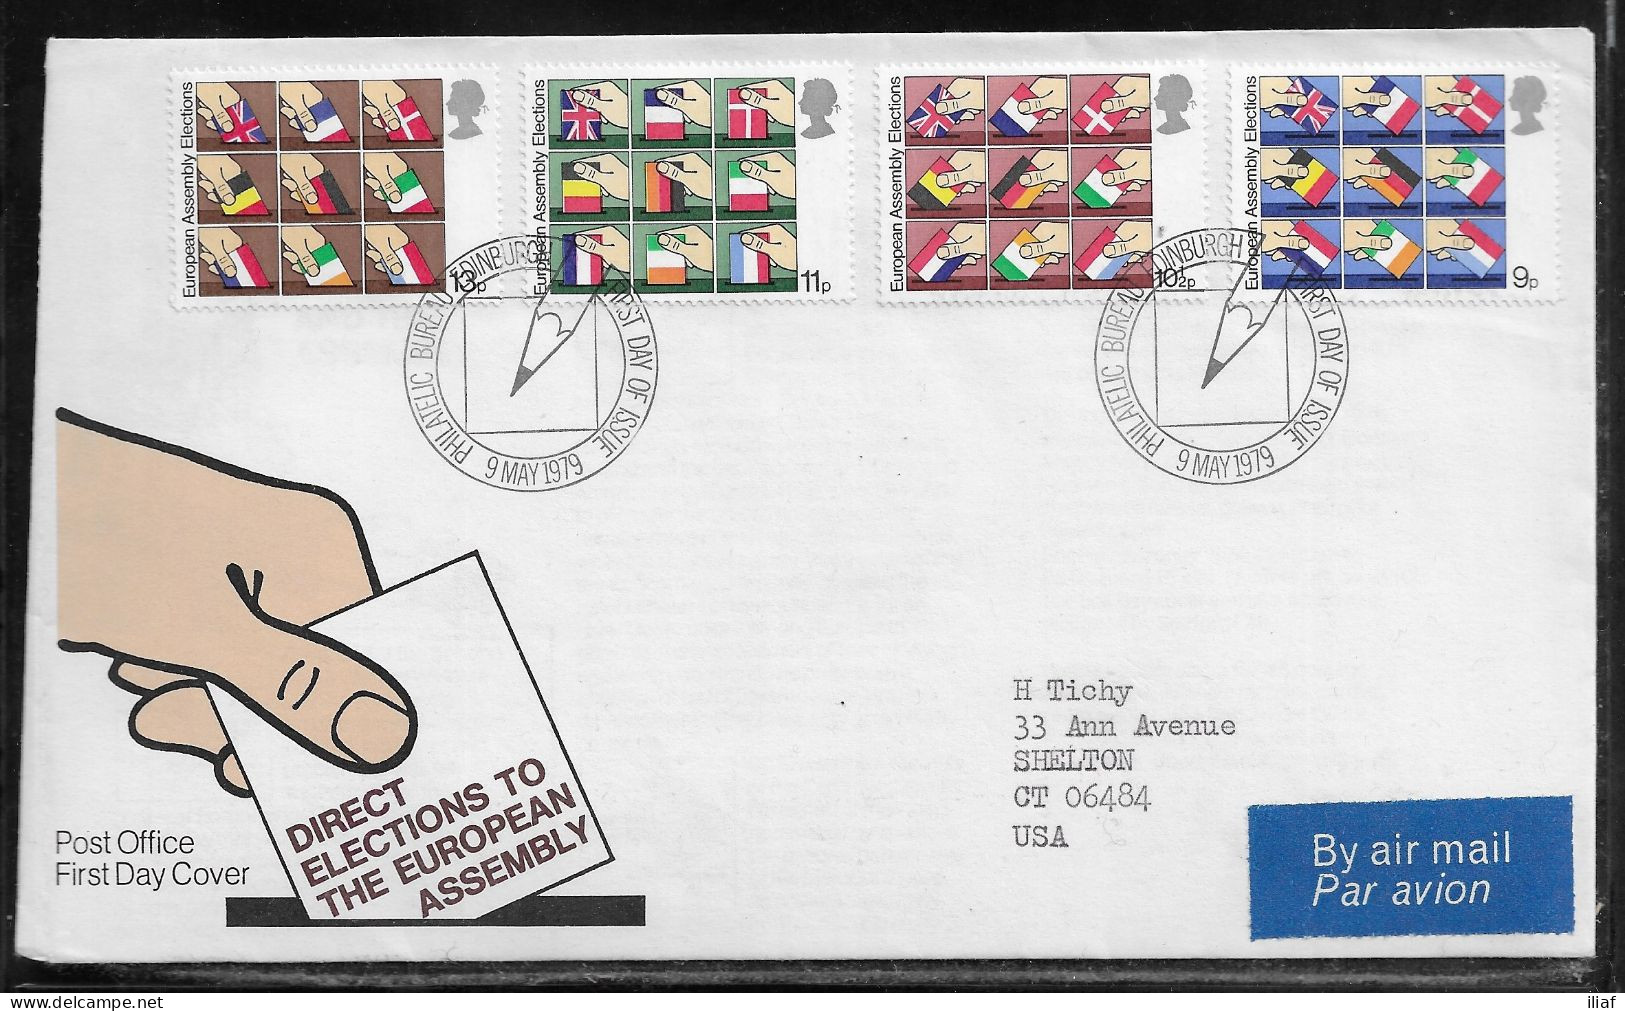 United Kingdom Of Great Britain.  FDC Sc. 859-862.  Hands Placing National Flags In Ballot Boxes  FDC Cancellation - 1971-1980 Em. Décimales